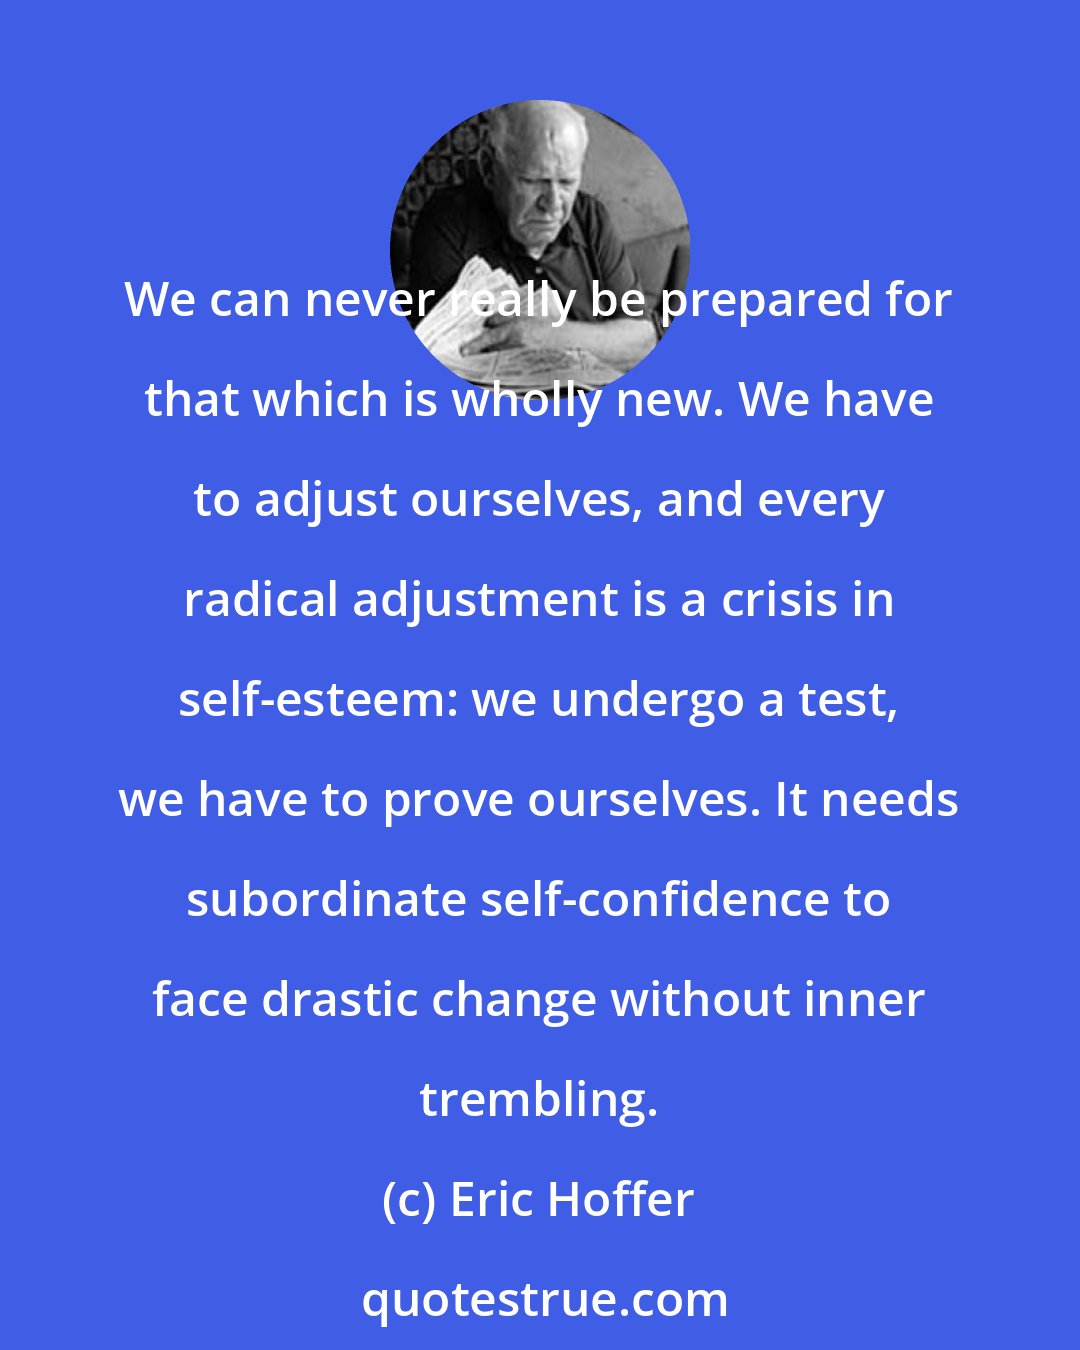 Eric Hoffer: We can never really be prepared for that which is wholly new. We have to adjust ourselves, and every radical adjustment is a crisis in self-esteem: we undergo a test, we have to prove ourselves. It needs subordinate self-confidence to face drastic change without inner trembling.